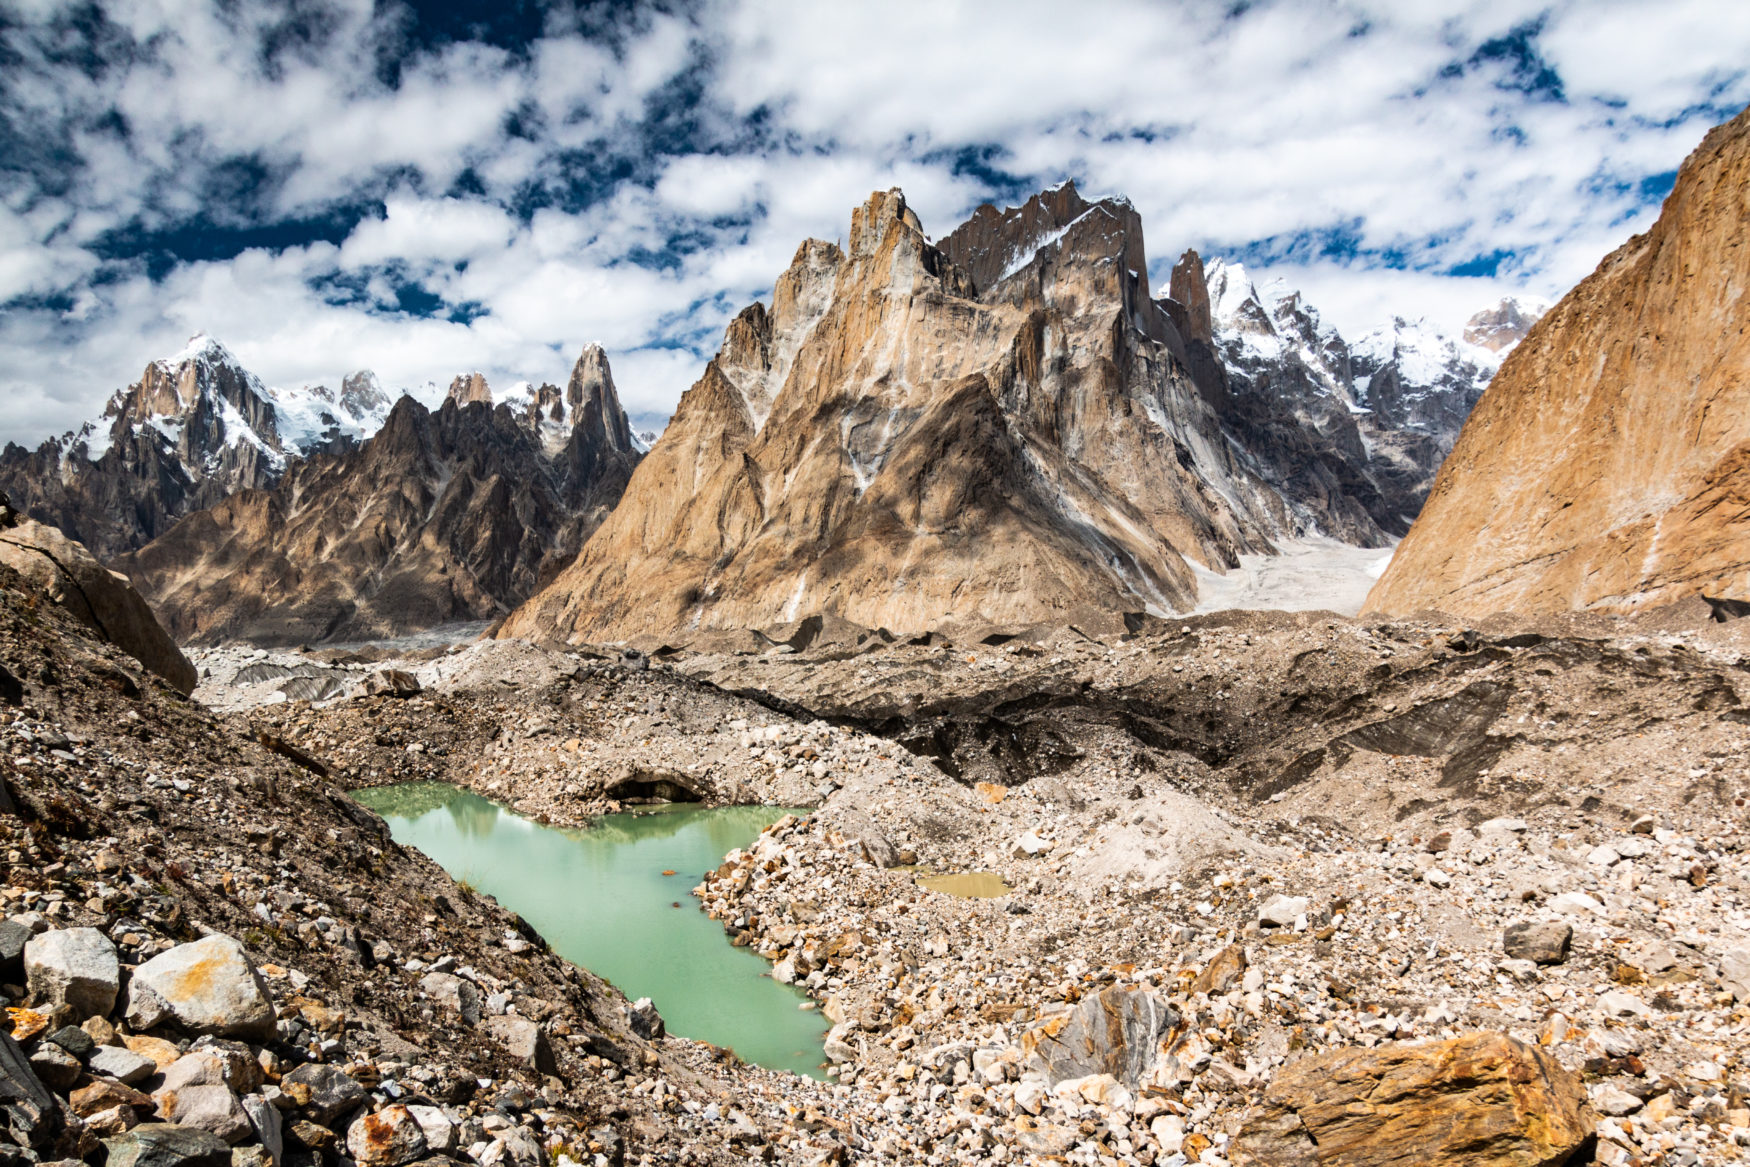 Photo of Trango Towers and Baltaro Glacier from Pakistan landscape stock photography website